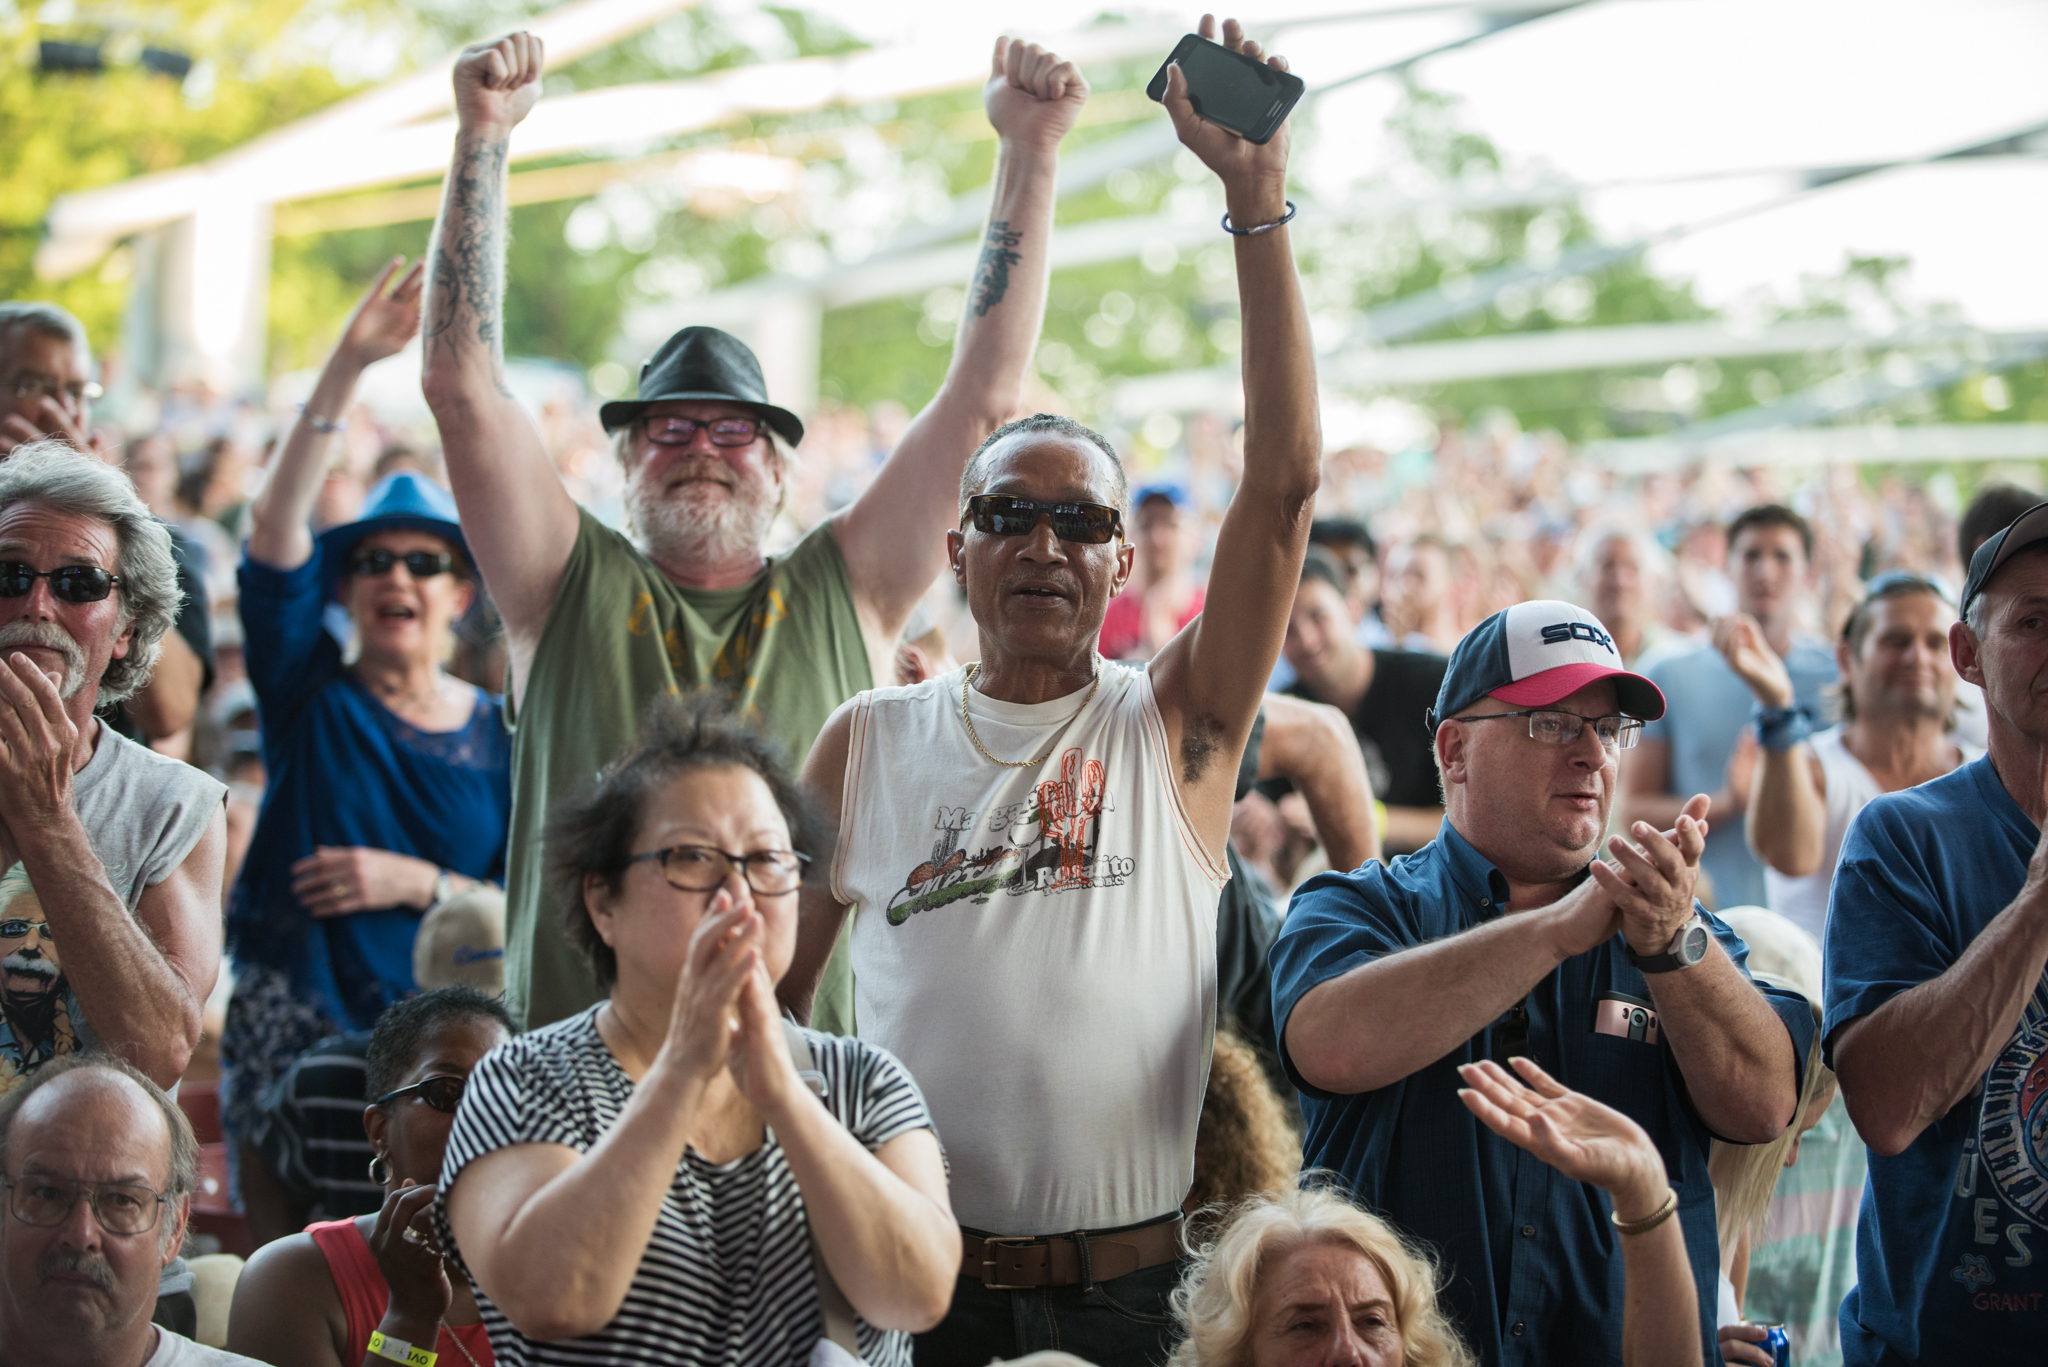 Check out photos from Chicago Blues Festival's first weekend in